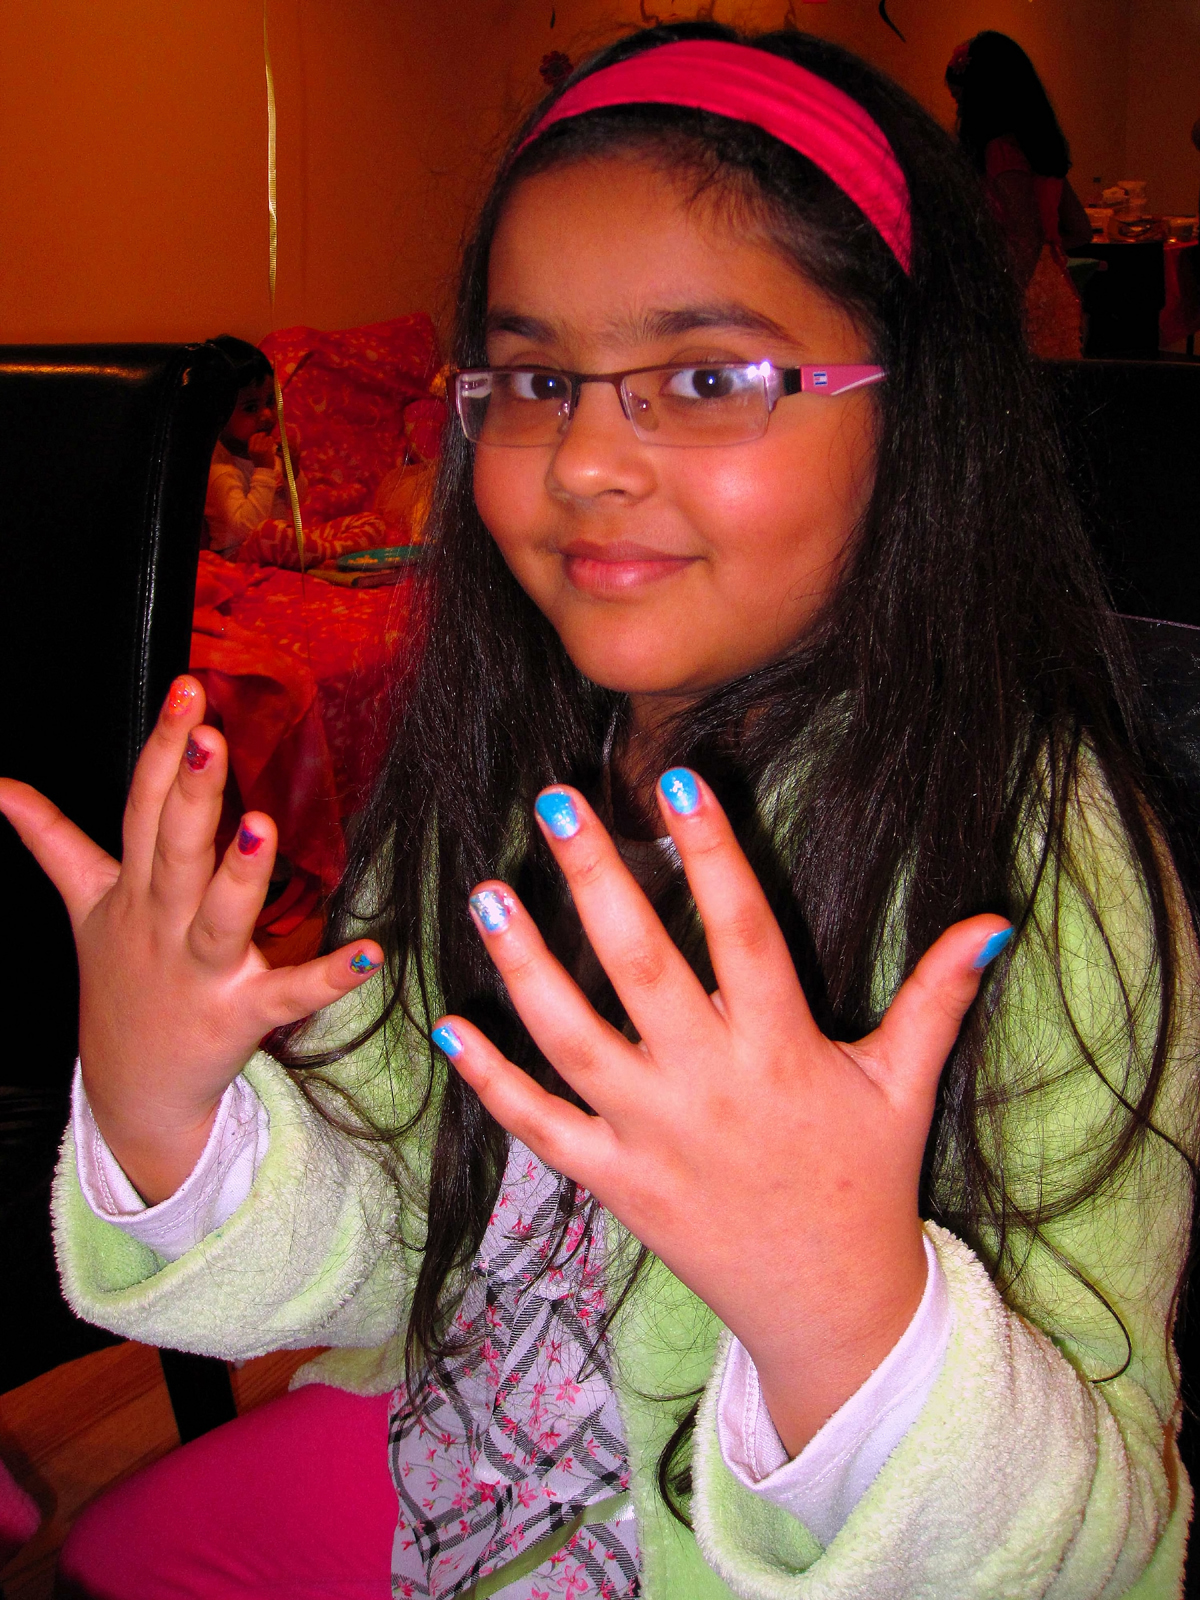 It's Great To Get Cool Manicures At The Kids Party! 